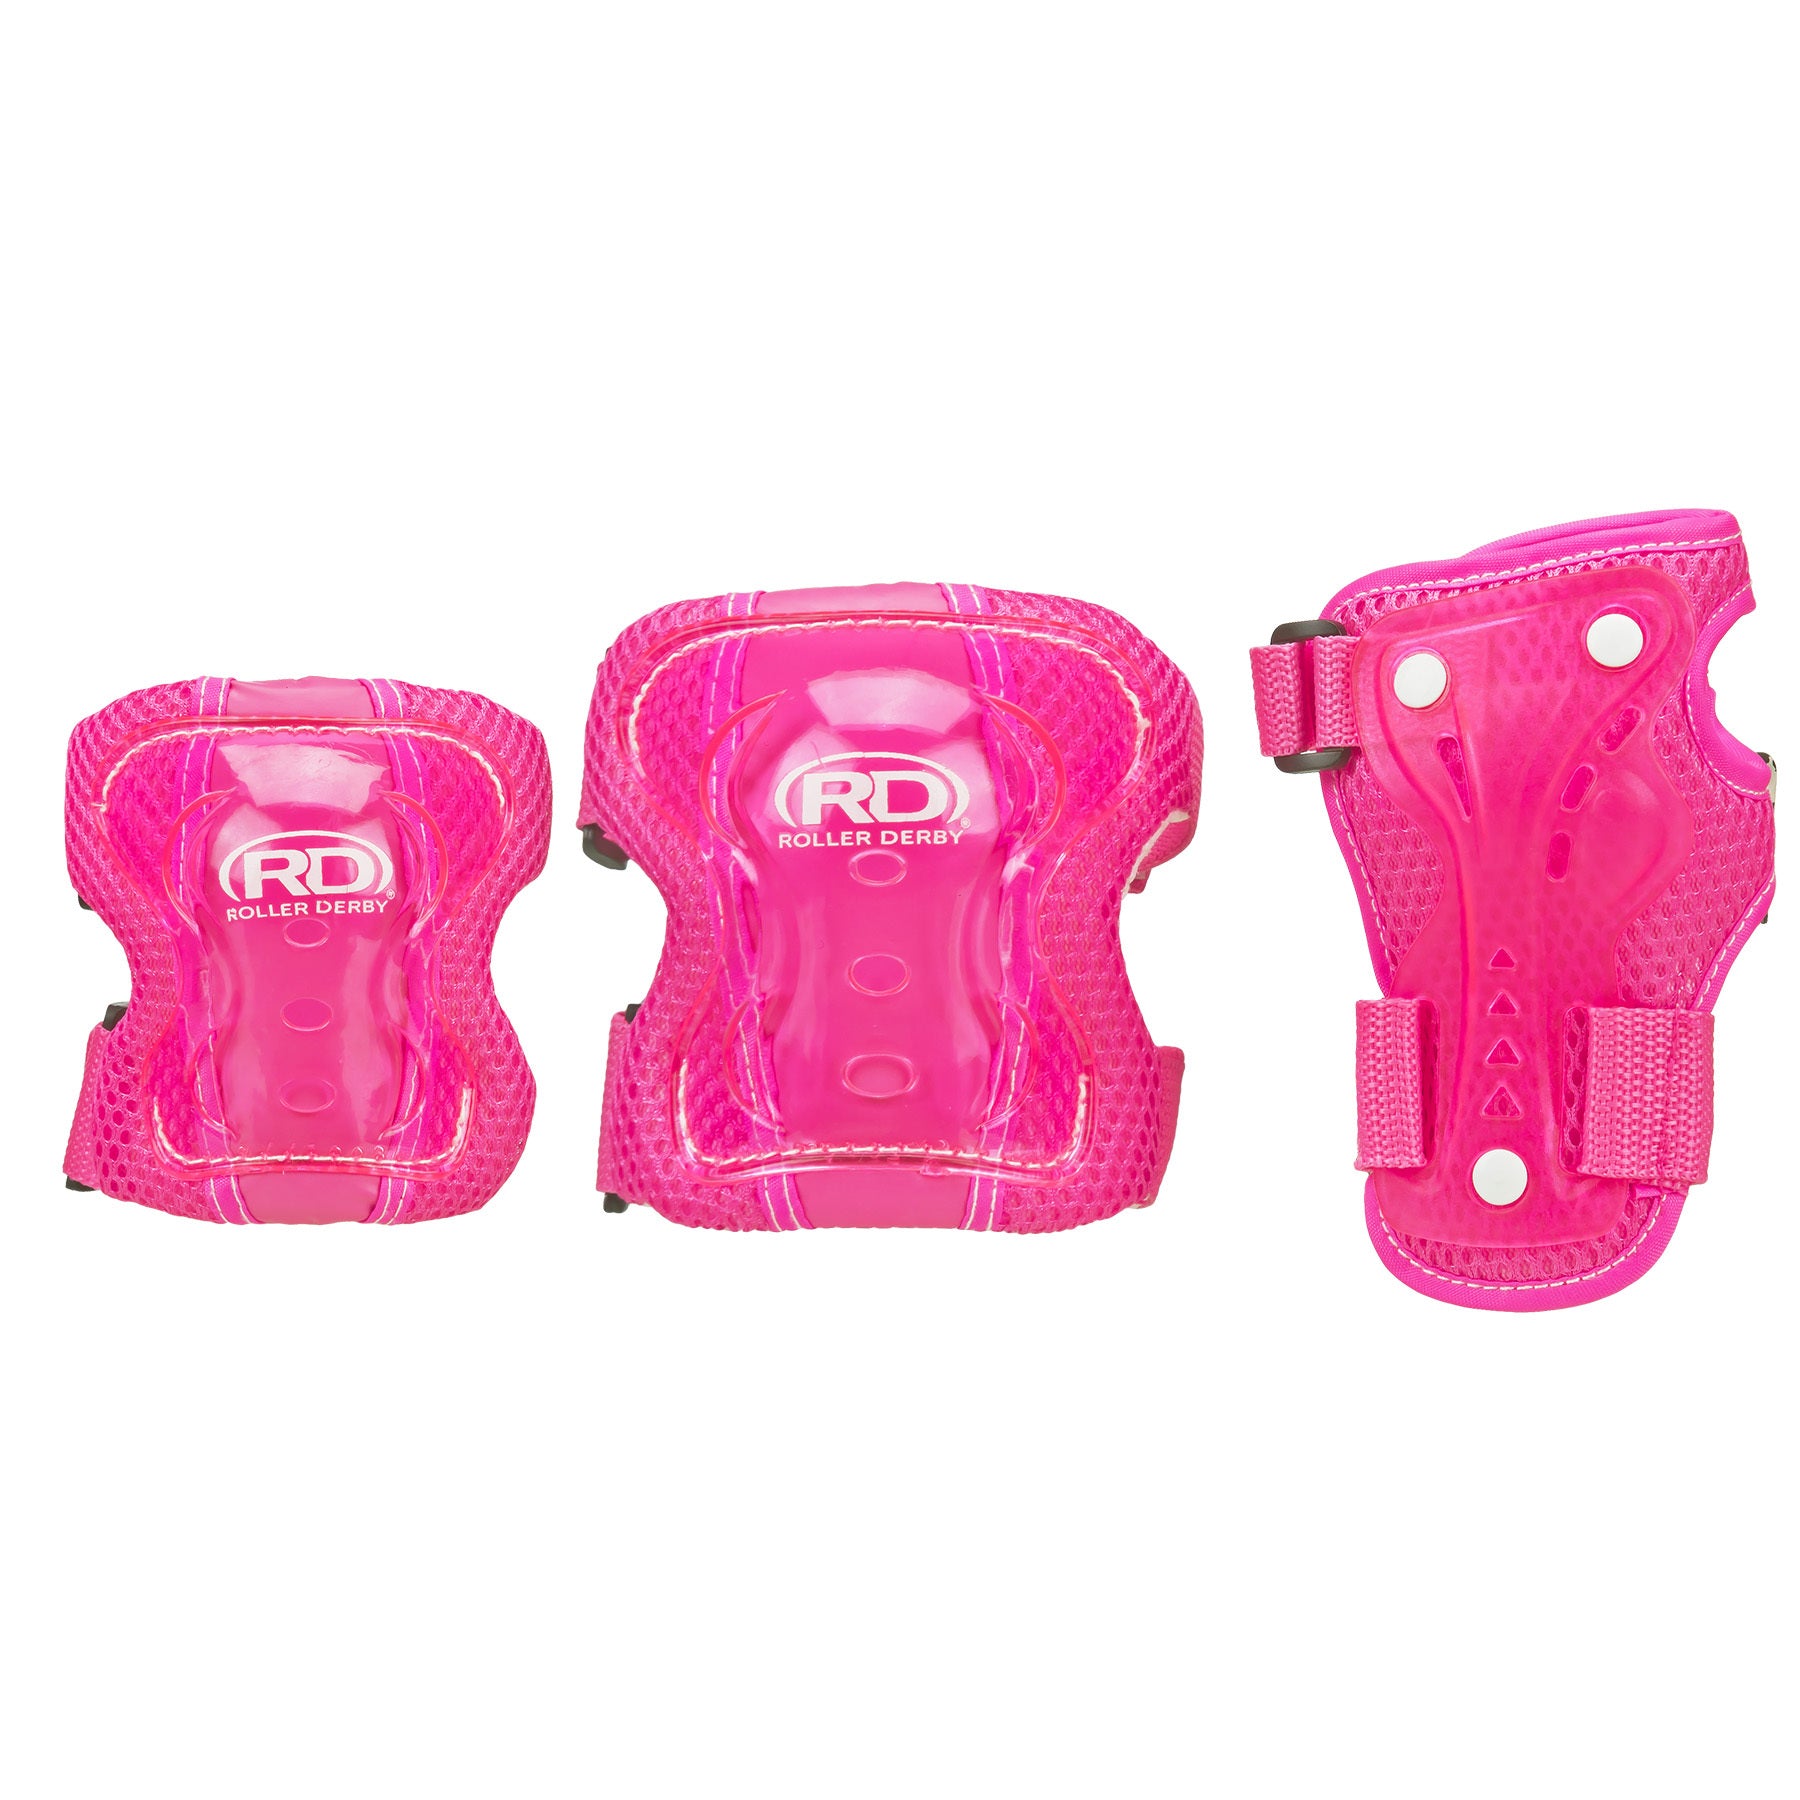 K2 YOUTH MARLEE PRO PAD SET PROTECTION GEAR